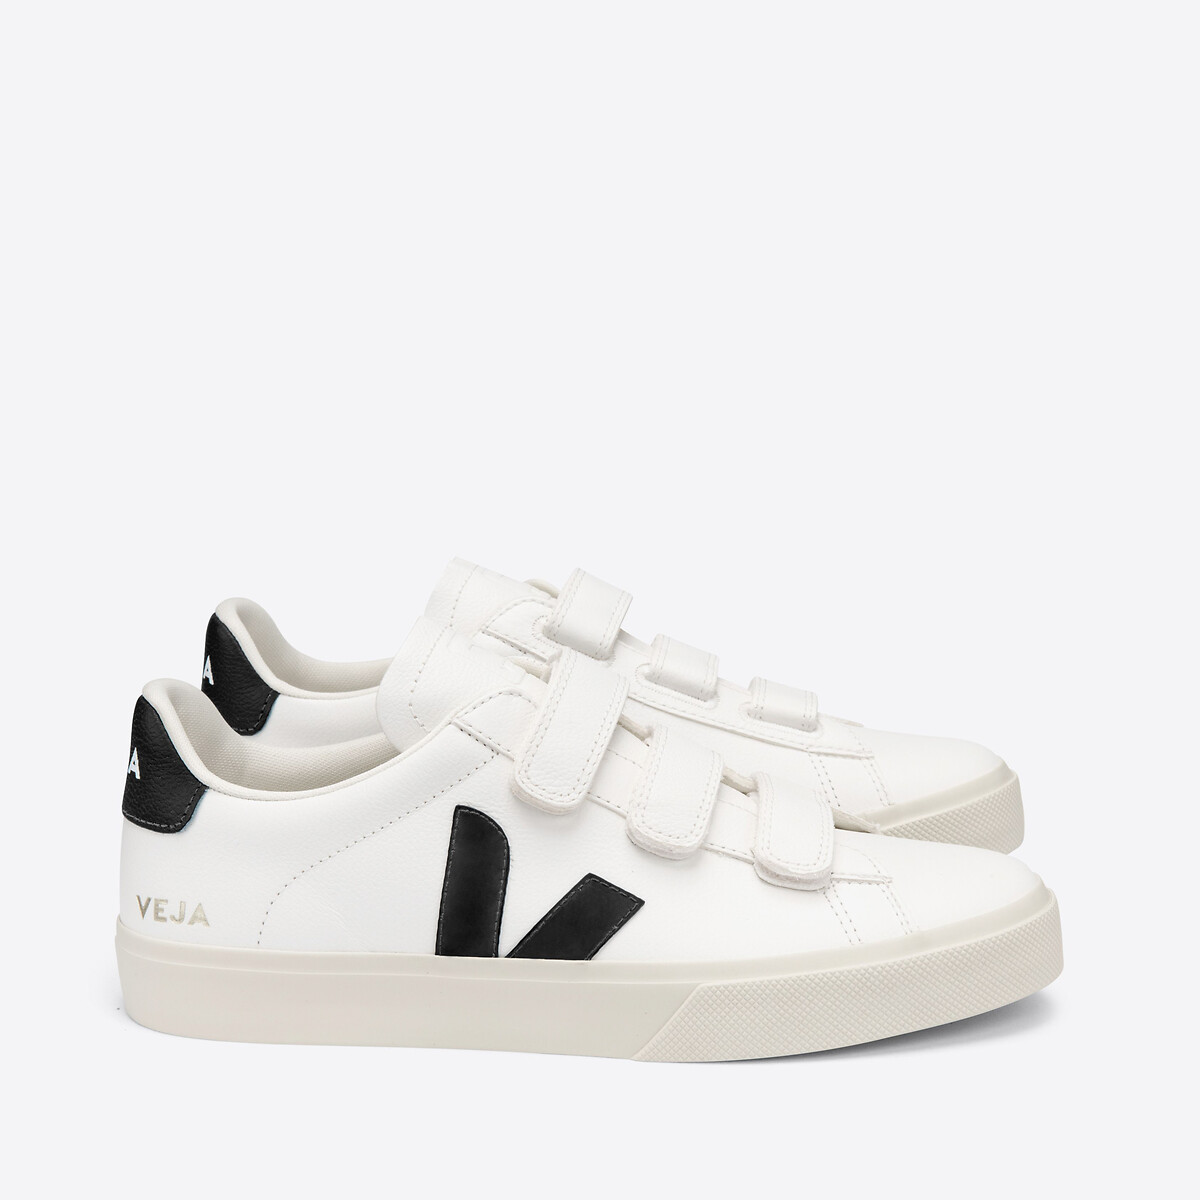 Recife Chrome Free Flatform Trainers in Leather with Touch ’n’ Close Fastening